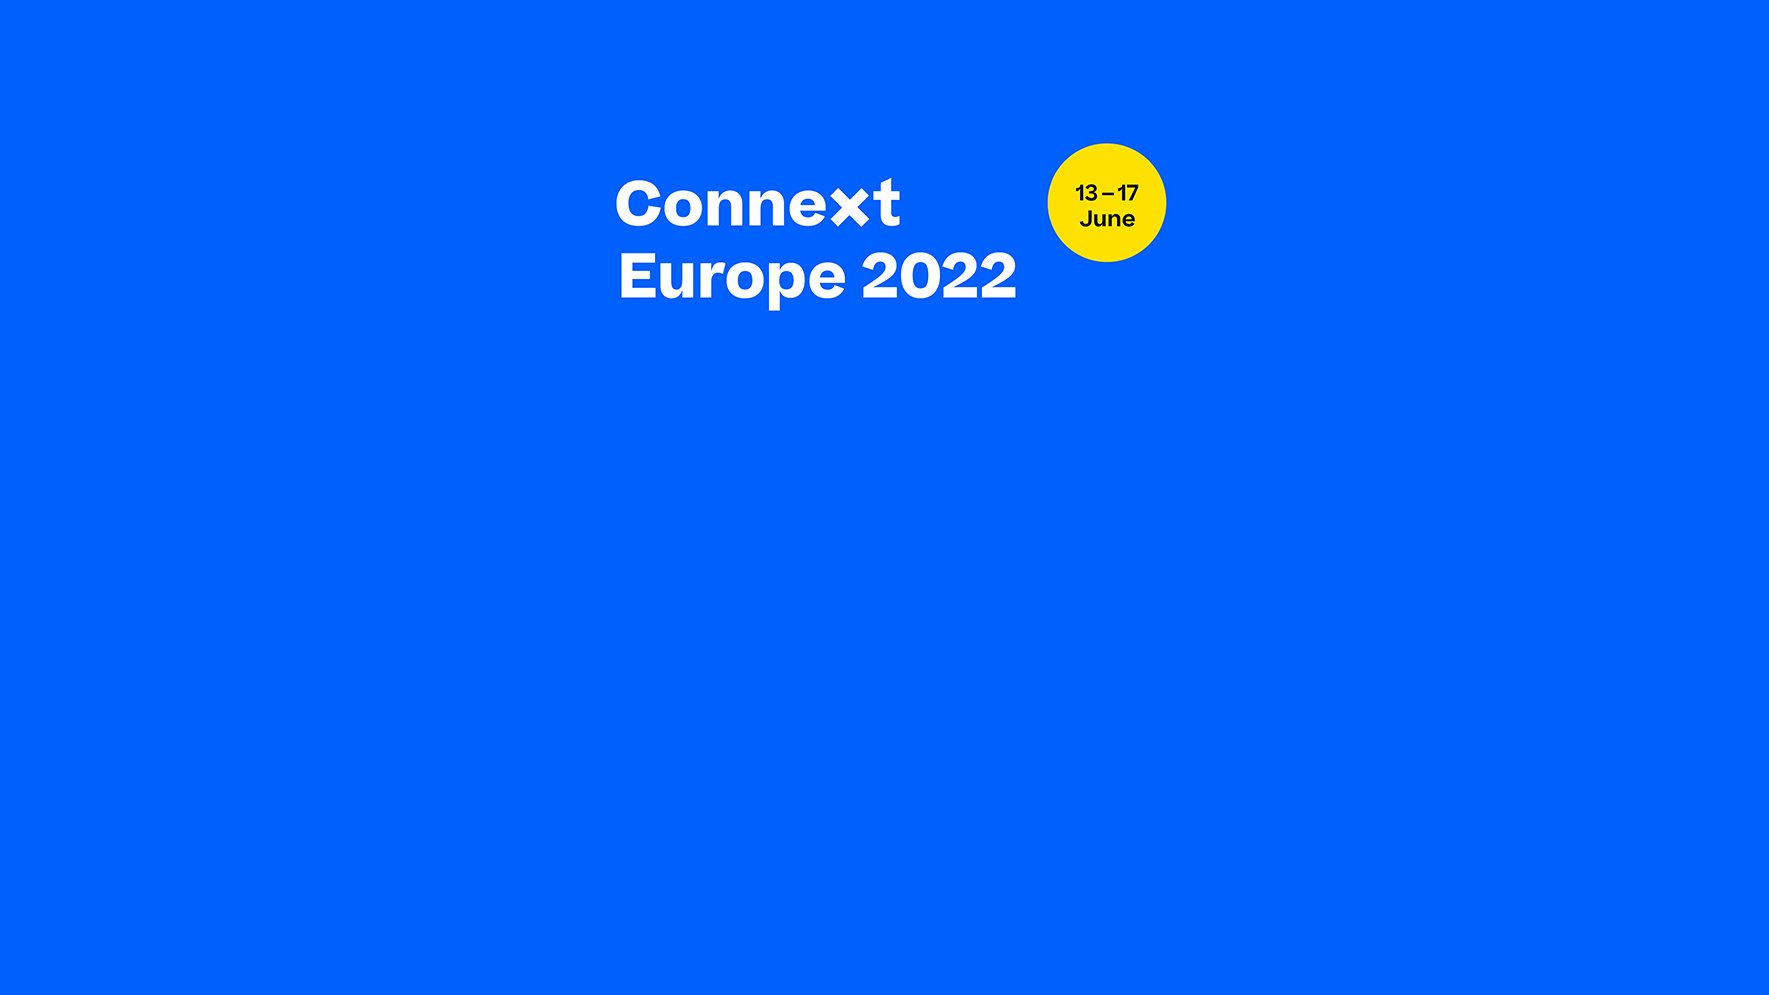 Welcome to Connext Europe 2022 - the Pharma Software Summit